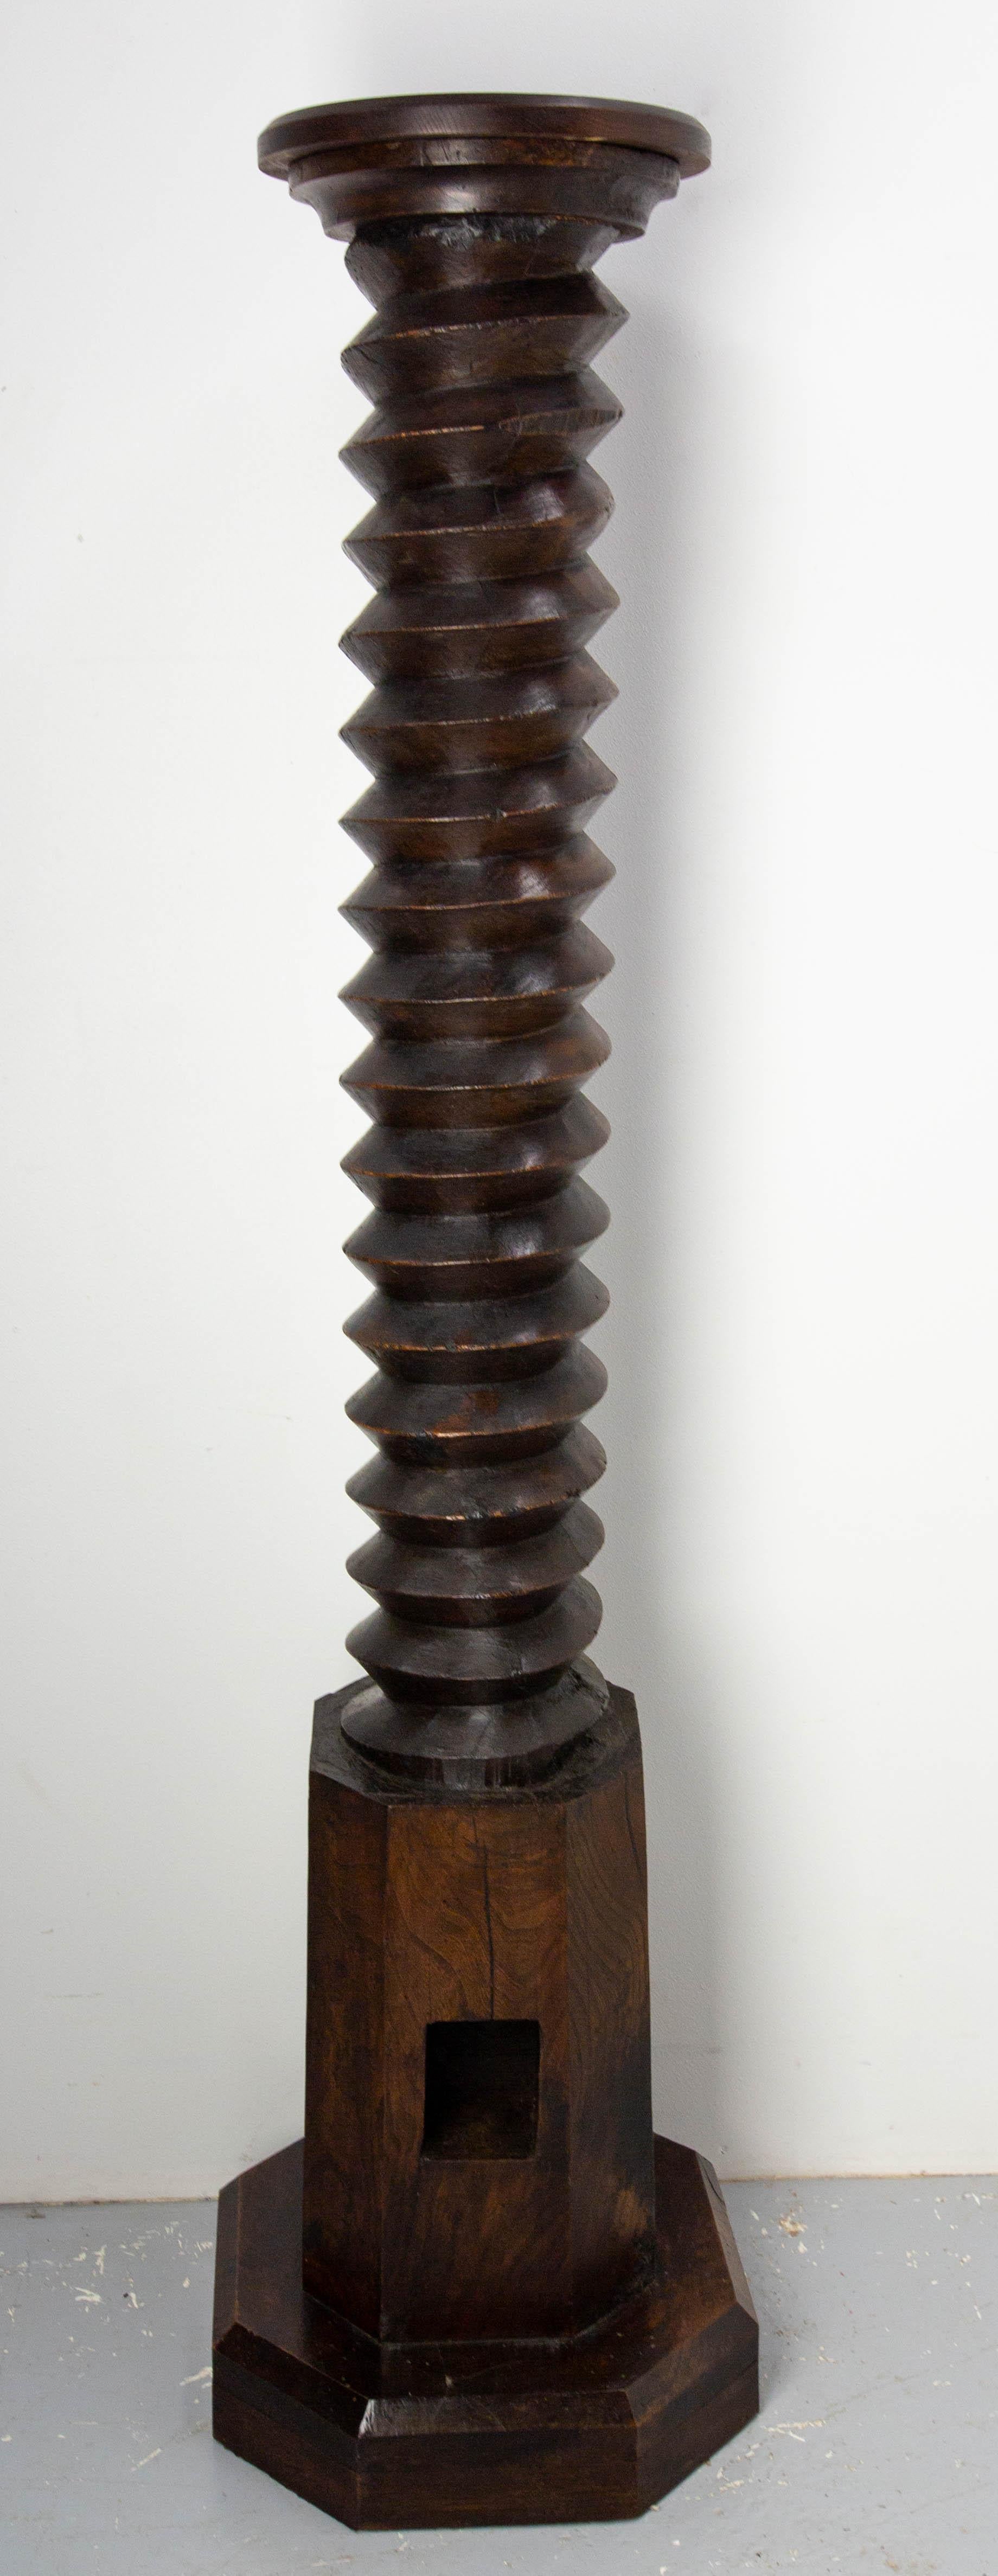 French pedestal wine press screw, 19th century.
Brutalist style
The low part allowed the sleeves to be inserted to turn the press screw
Good antique condition
Solid and sound

Shipping: 
40 / 40 / 159 cm 34.5 Kg.